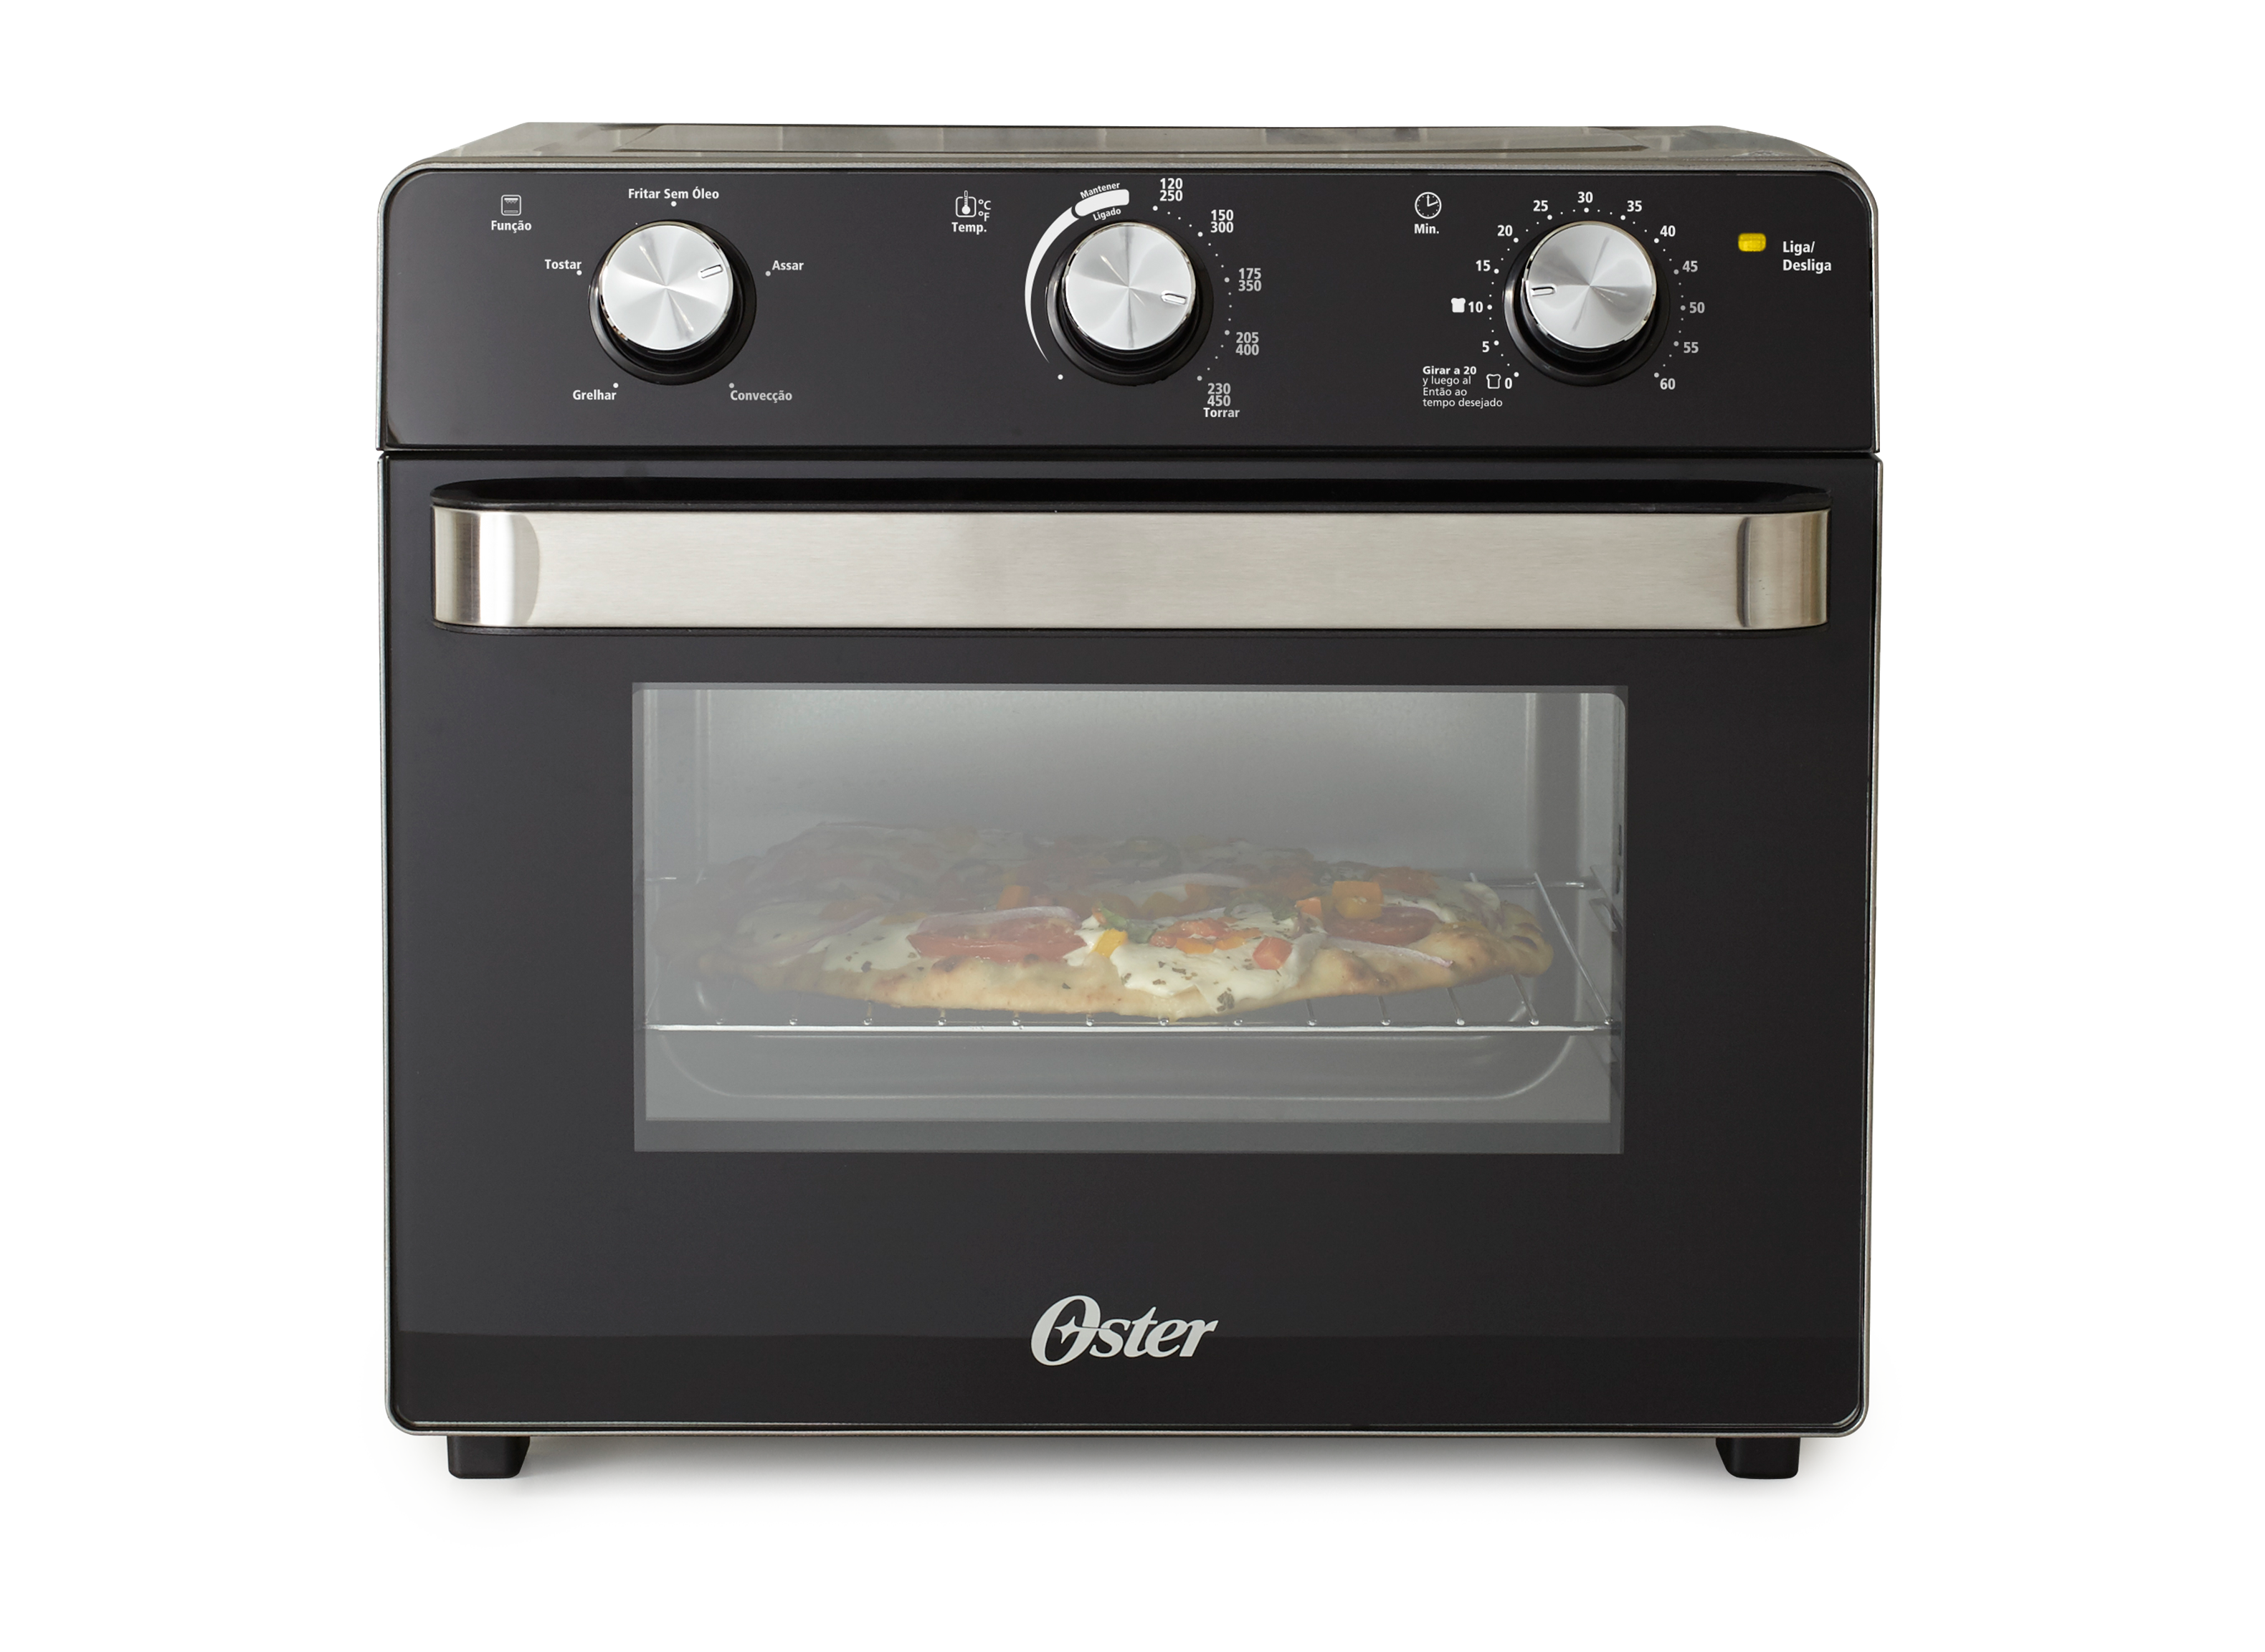 Oster Air Fryer Oven 10 in 1 Countertop Toaster Oven Air Fryer